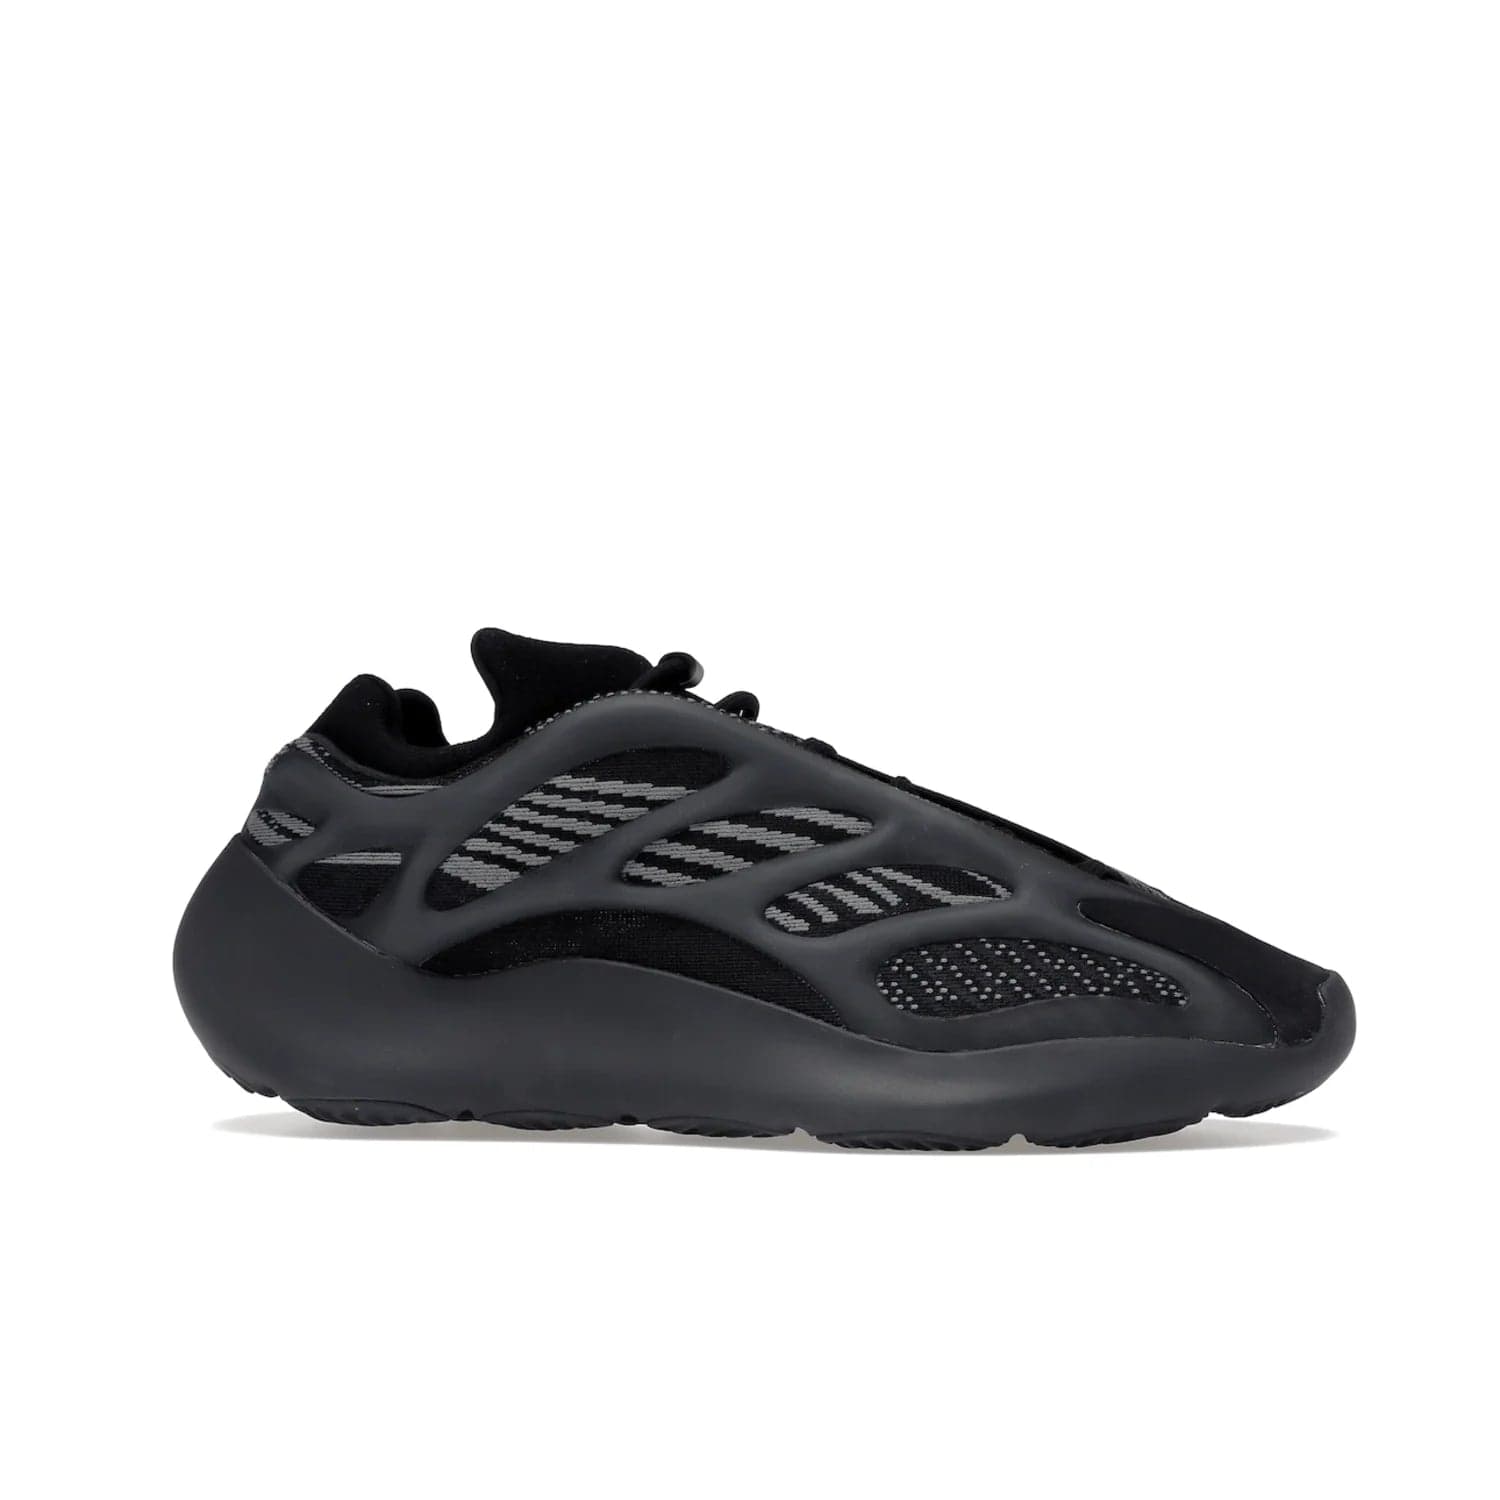 adidas Yeezy 700 V3 Dark Glow - Image 2 - Only at www.BallersClubKickz.com - The adidas Yeezy 700 V3 Dark Glow is a glowing dark sneaker for making a statement. Primeknit upper, TPU cage, and EVA foam soles provide comfort. Released in August 2021 - the perfect addition to any wardrobe.